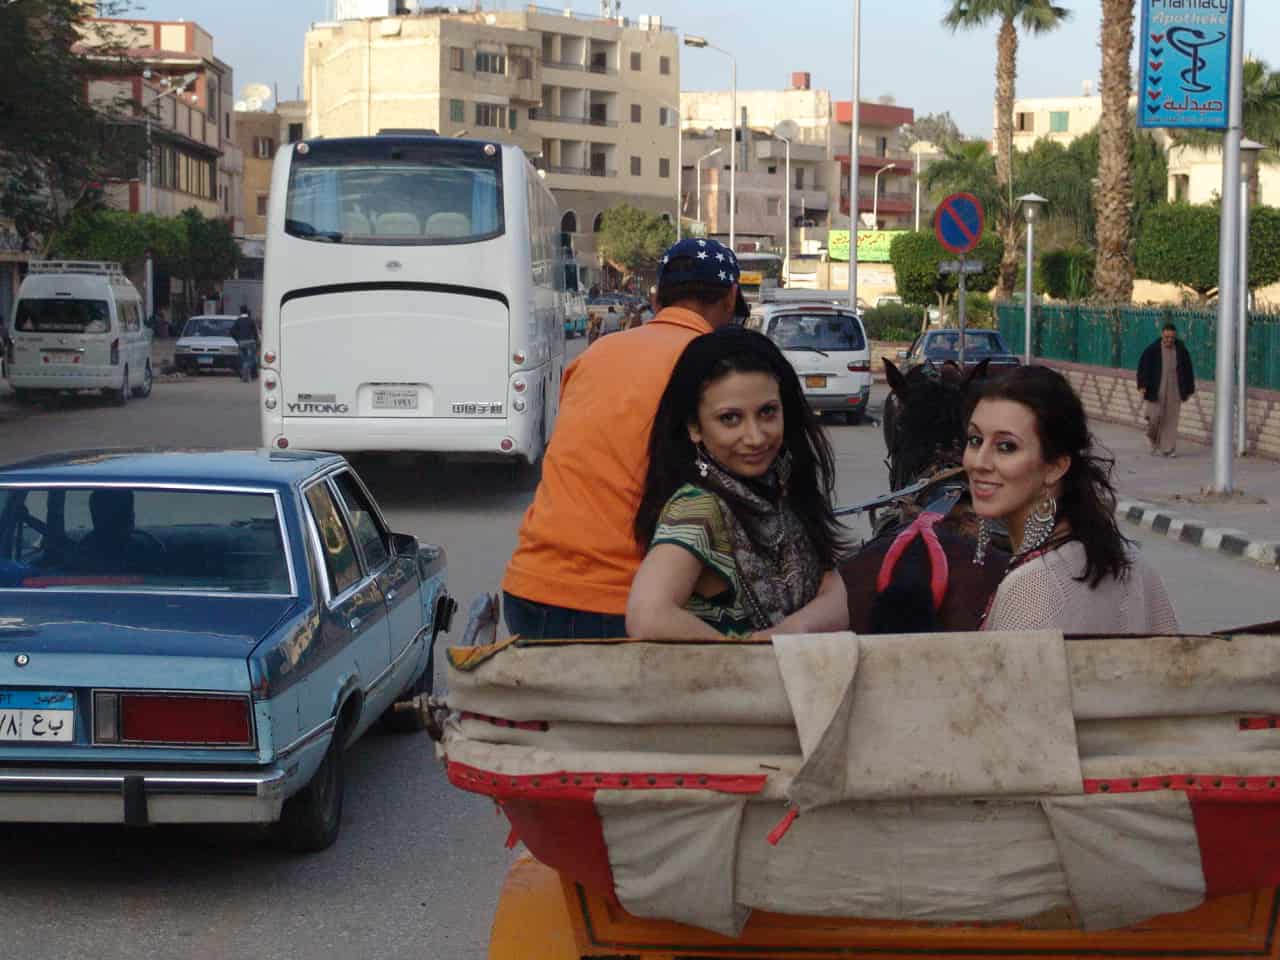 Dana and Maria on a carriage in Giza, Egypt